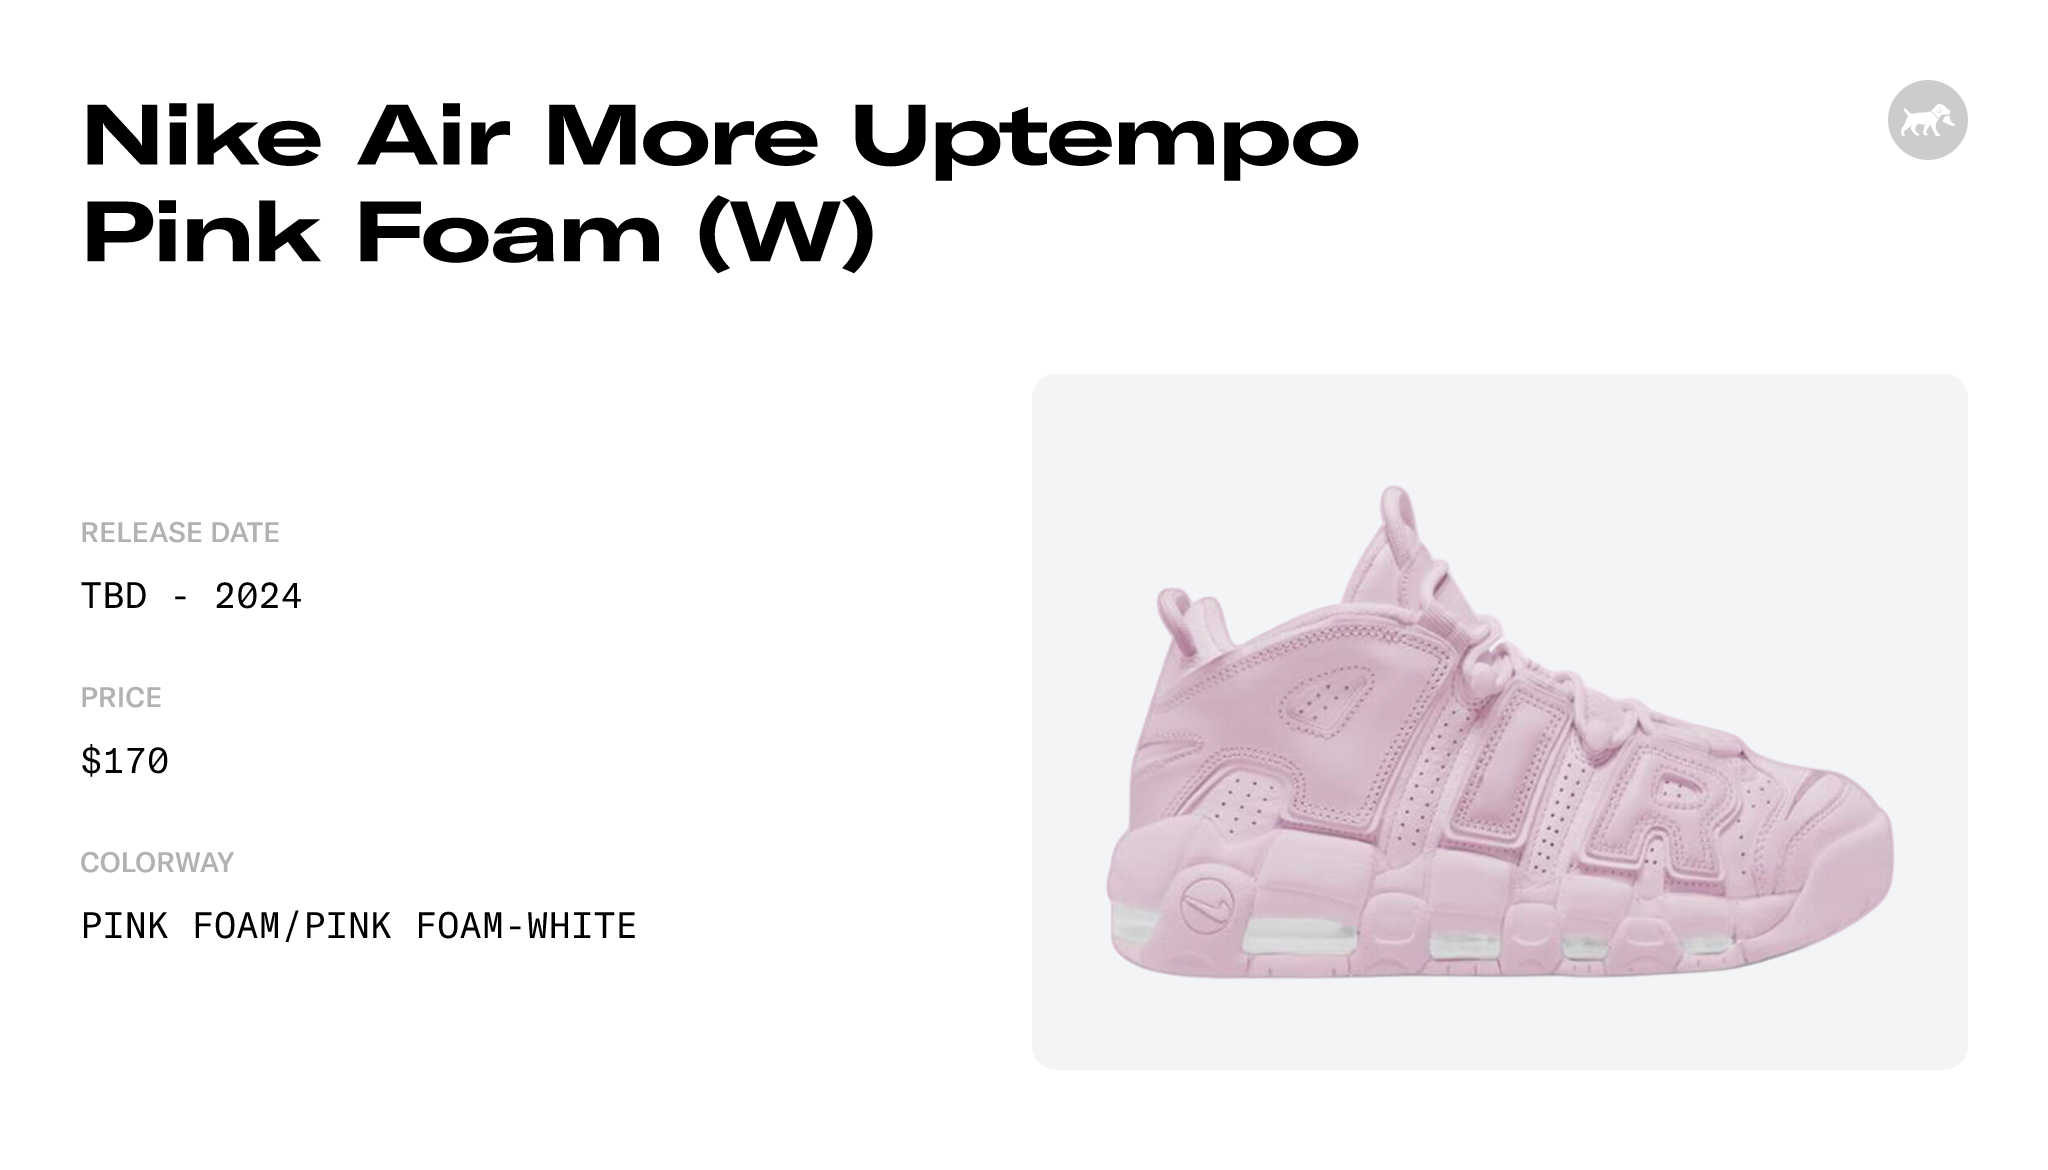 Nike Air More Uptempo Pink Foam (W) - DV1137-600 Raffles and Release Date